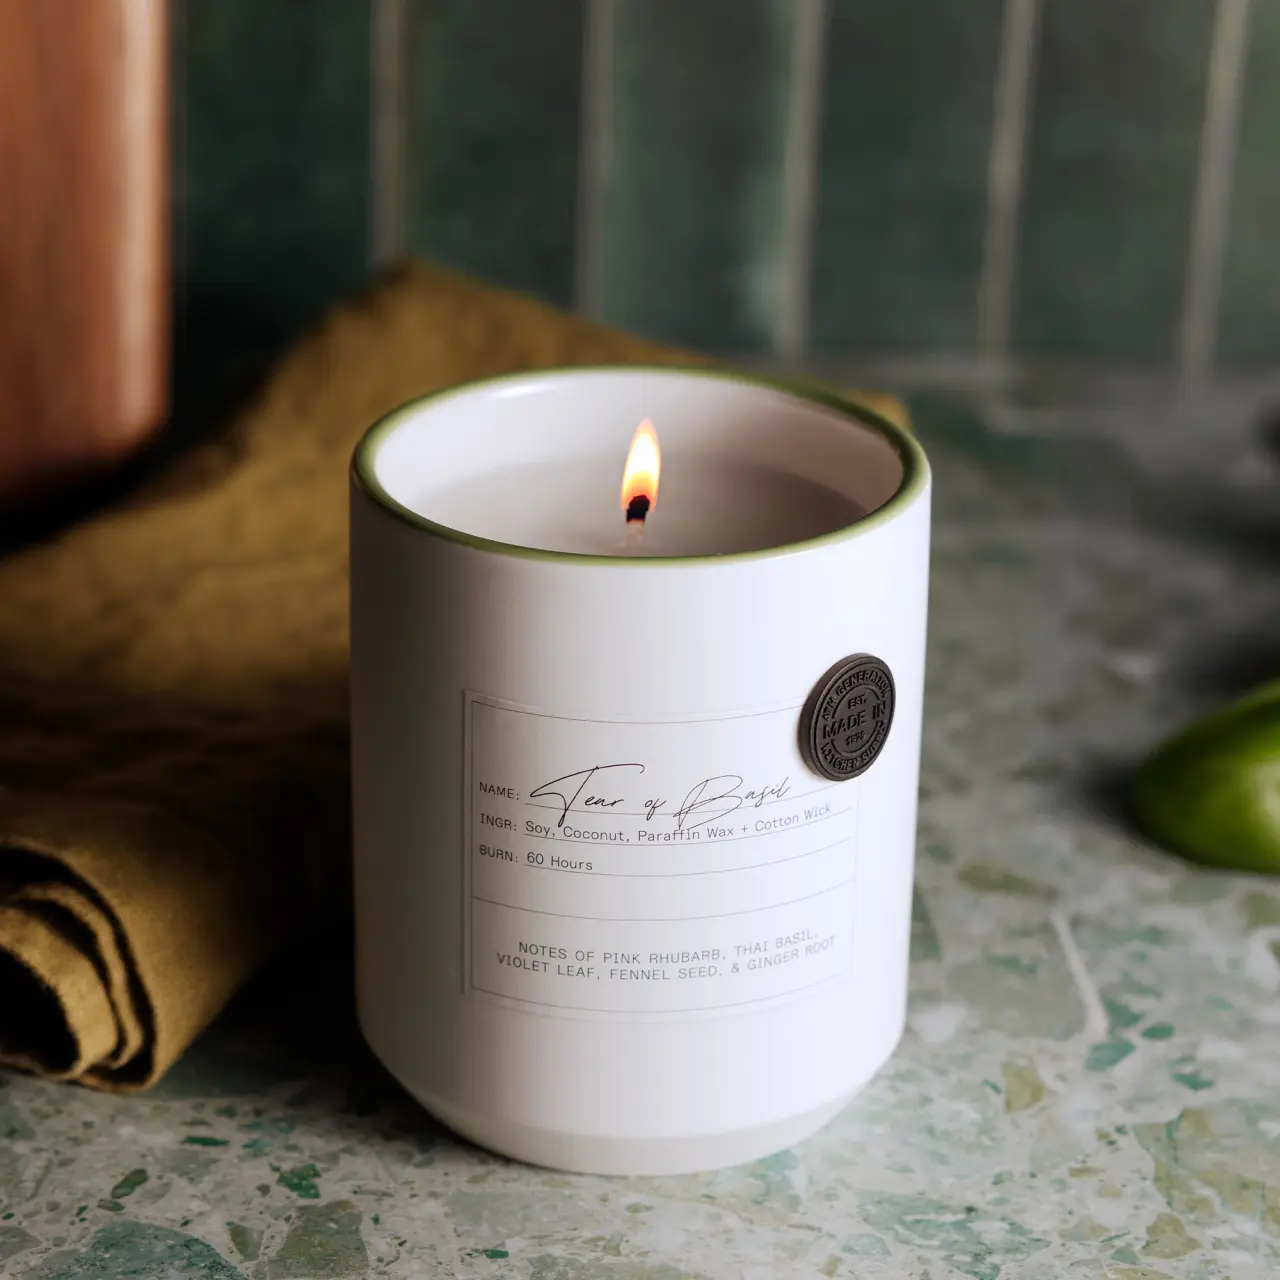 A lit scented candle with a label is placed on a countertop near a mustard-colored cloth and a hint of green limes in the background.